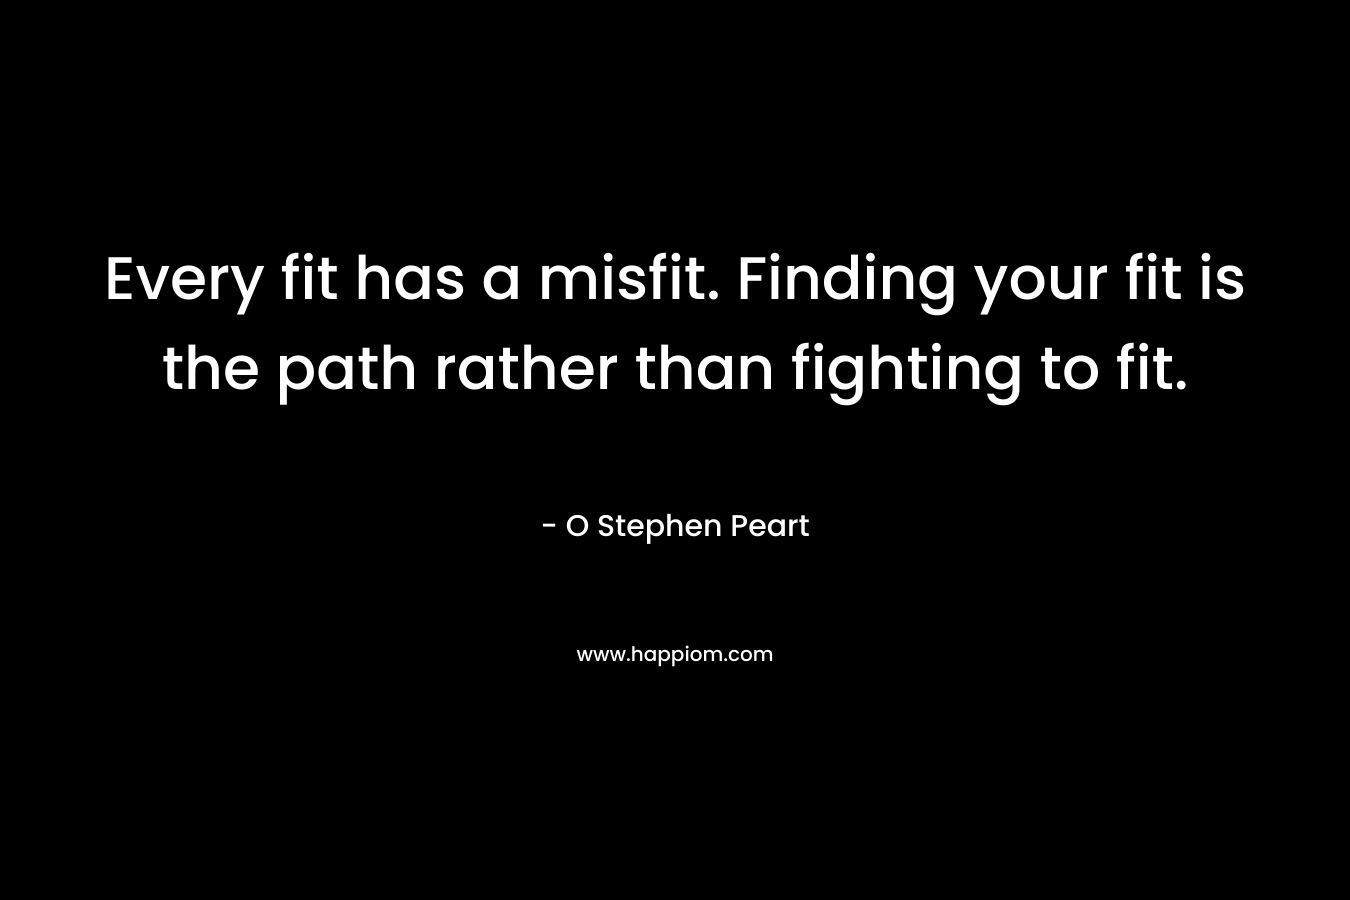 Every fit has a misfit. Finding your fit is the path rather than fighting to fit.